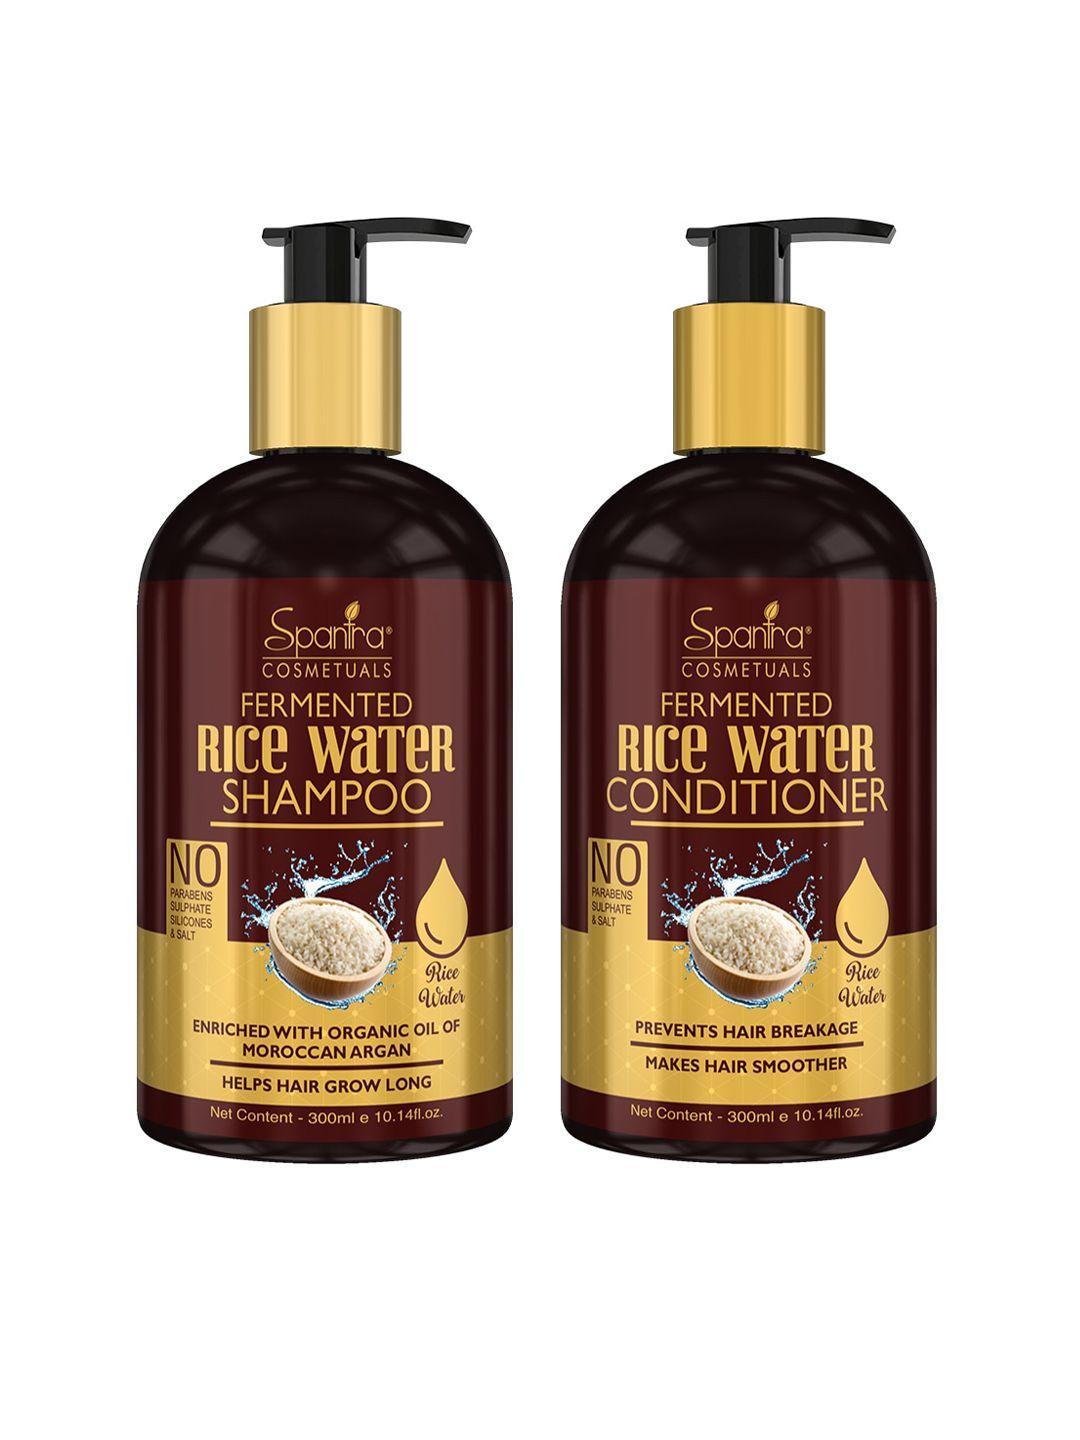 spantra rice water shampoo & conditioner combo